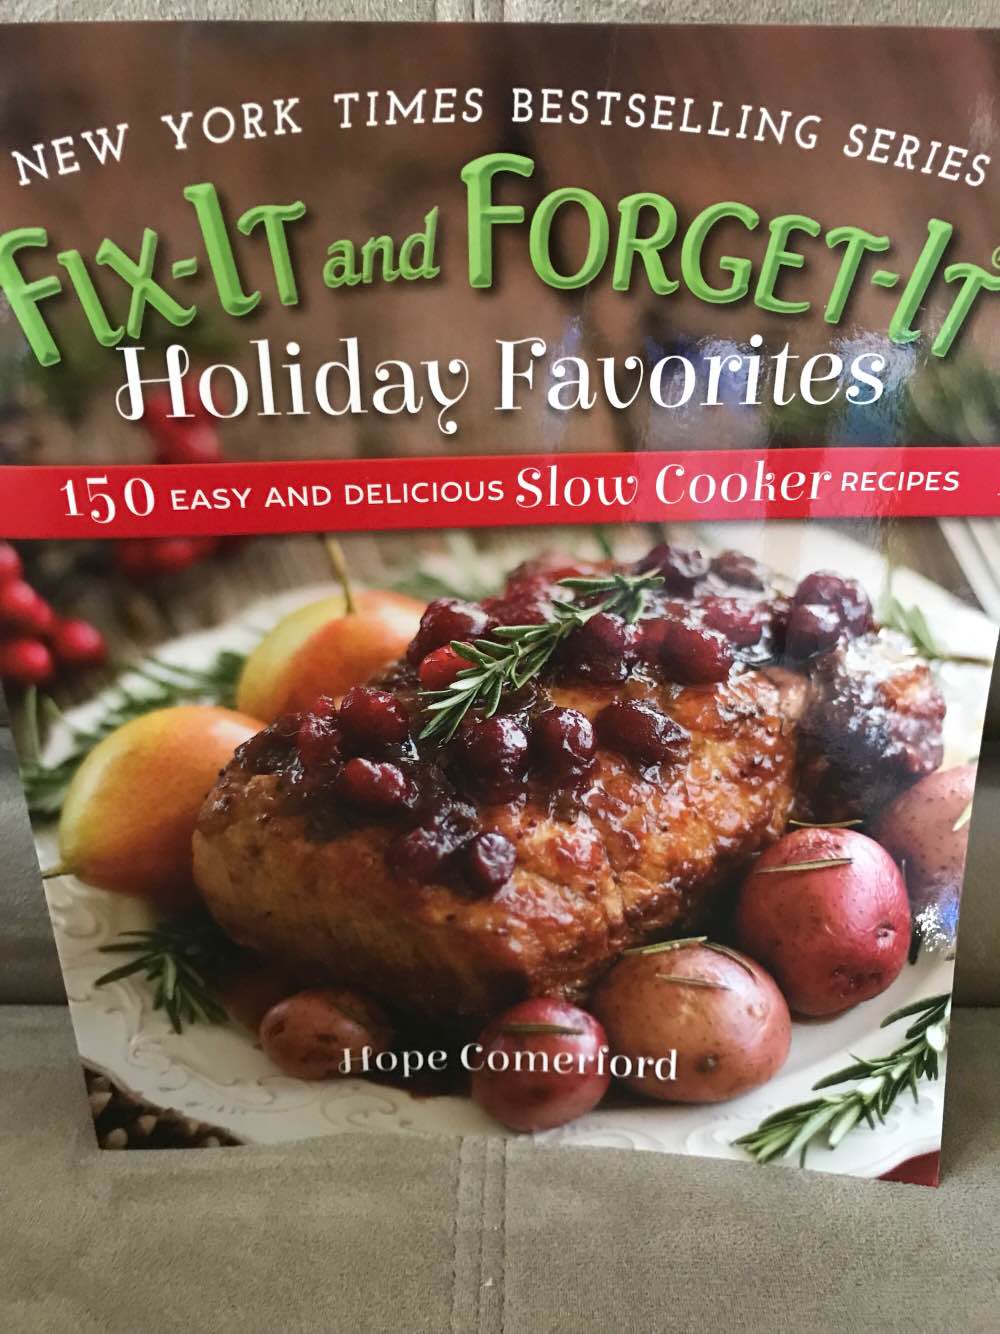 Fix it and Forget it Holiday Favorites: 150 Easy and Delicious Slow Cooker Recipes